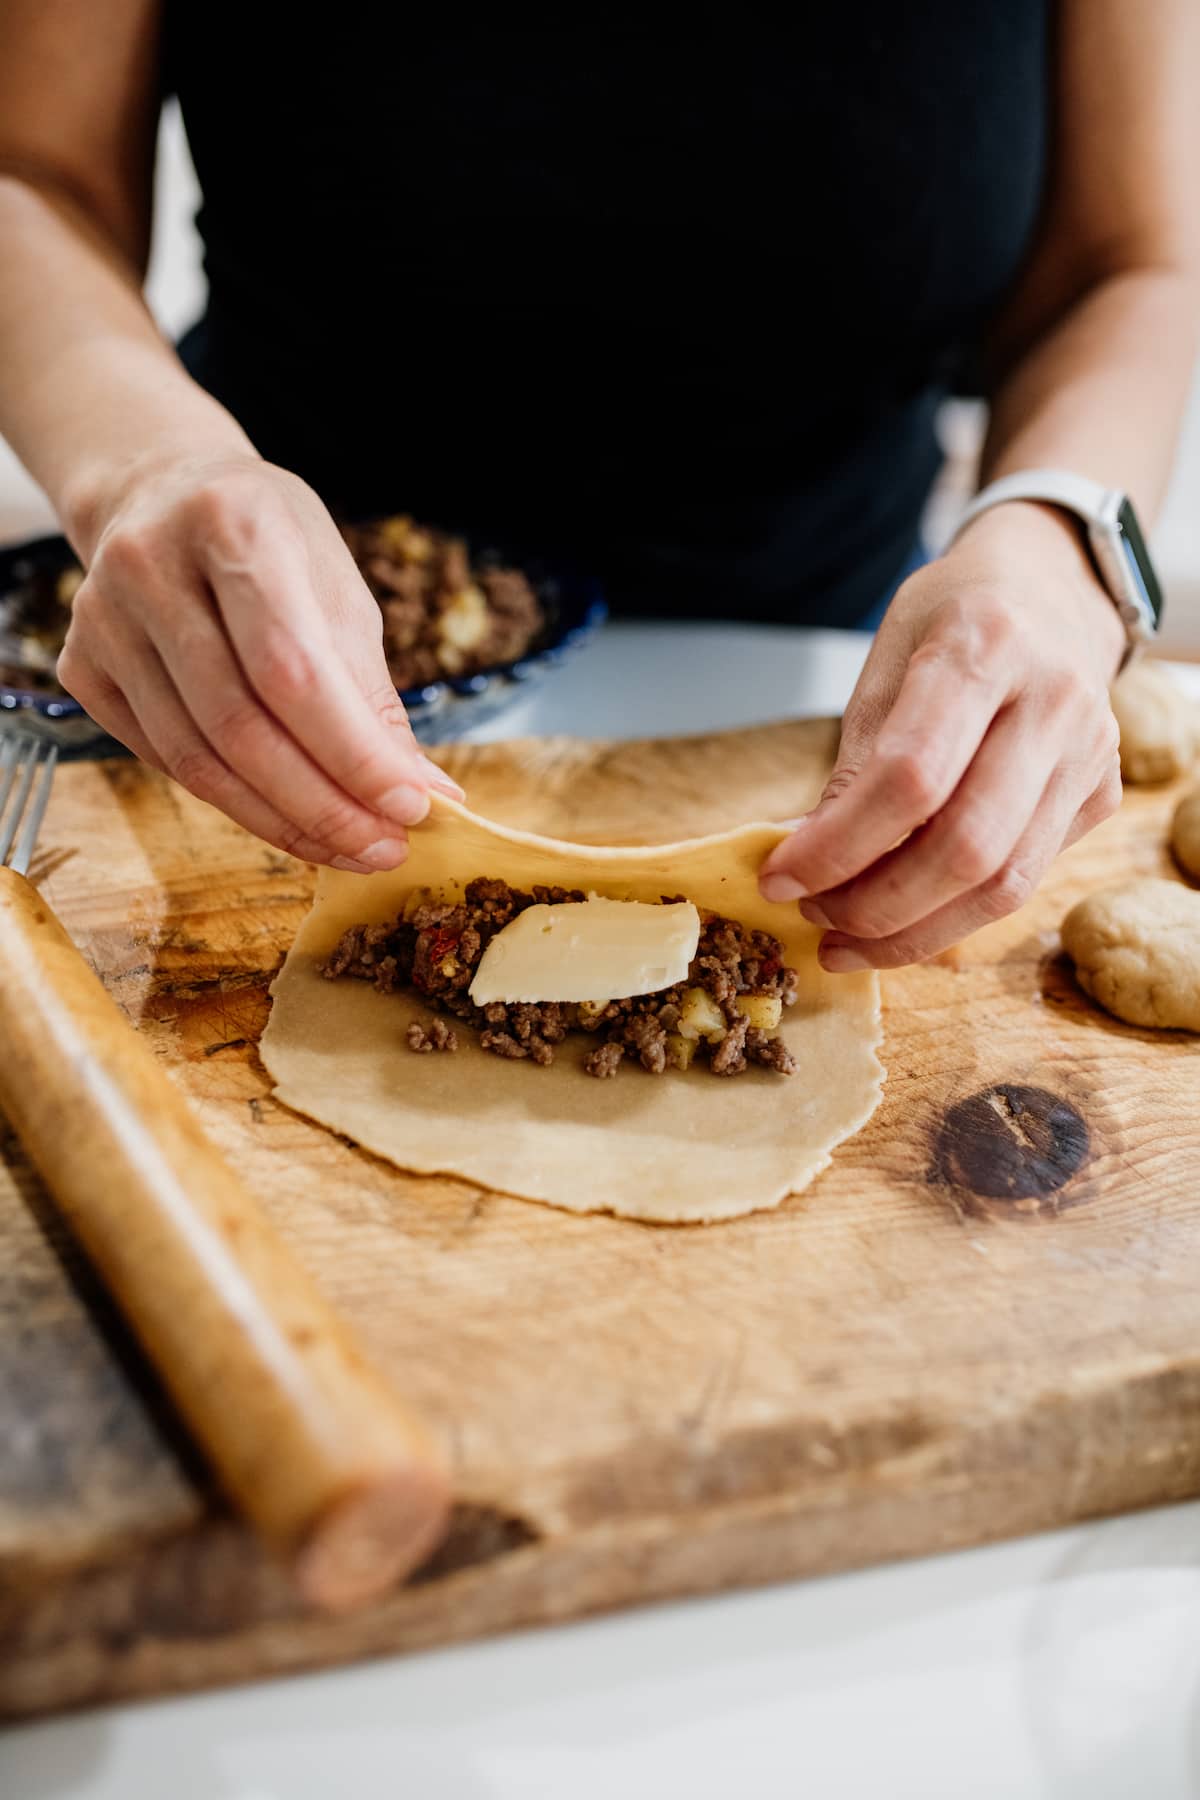 empanada disk being filled with picadillo and a slice of cheese and folded over with hands.